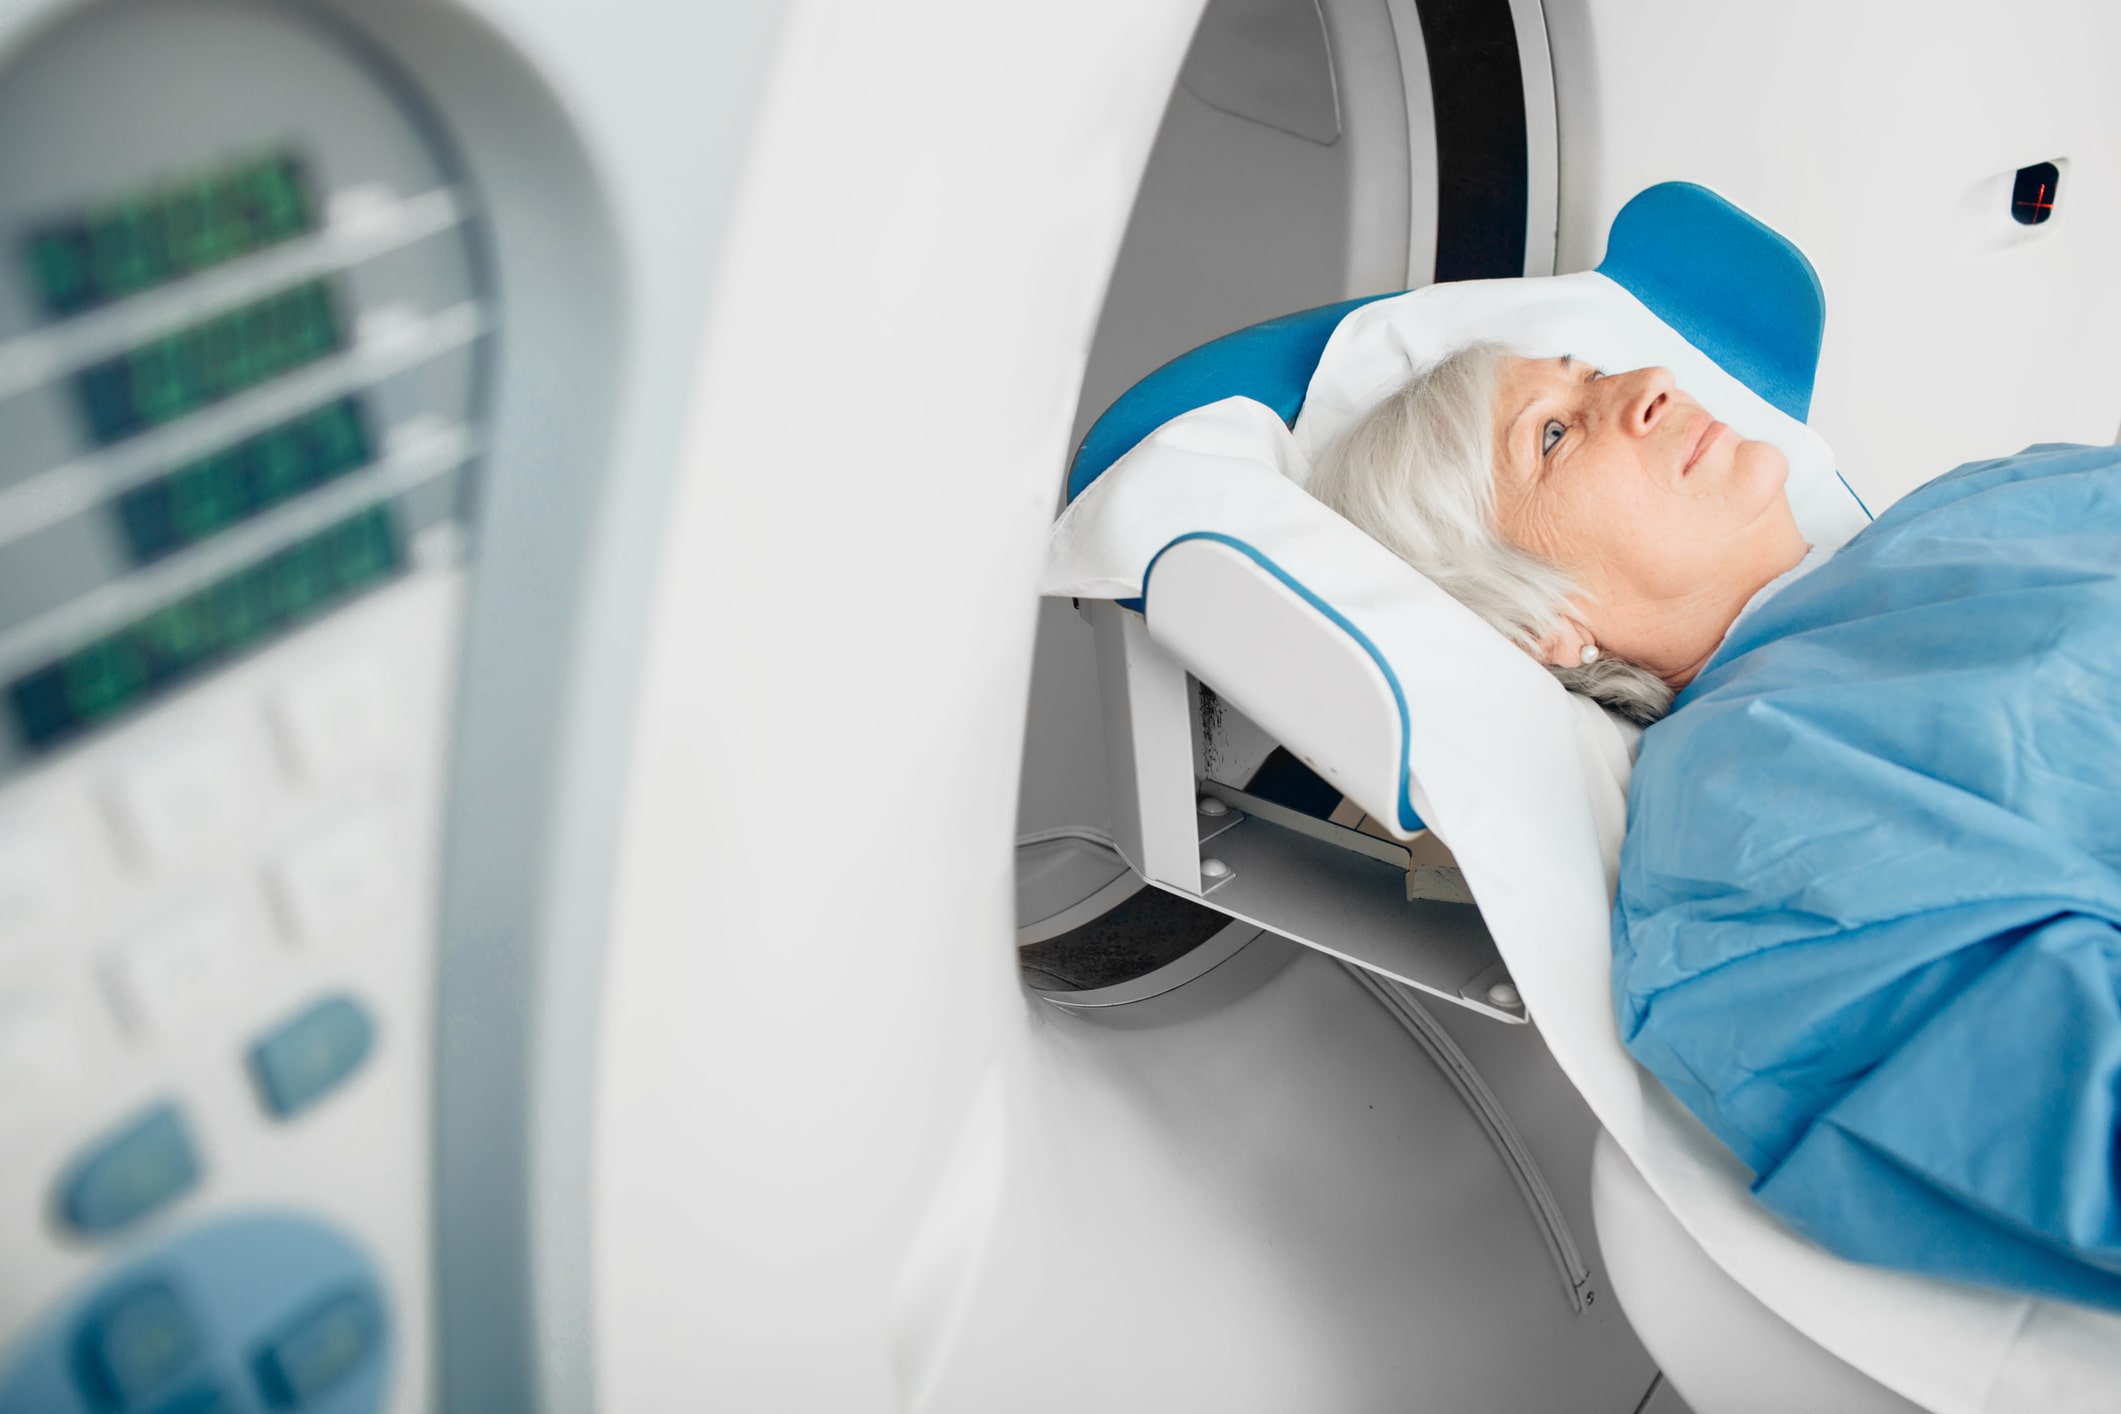 buffet score Bugsering Reasons You May Need a CT Scan - Health Images